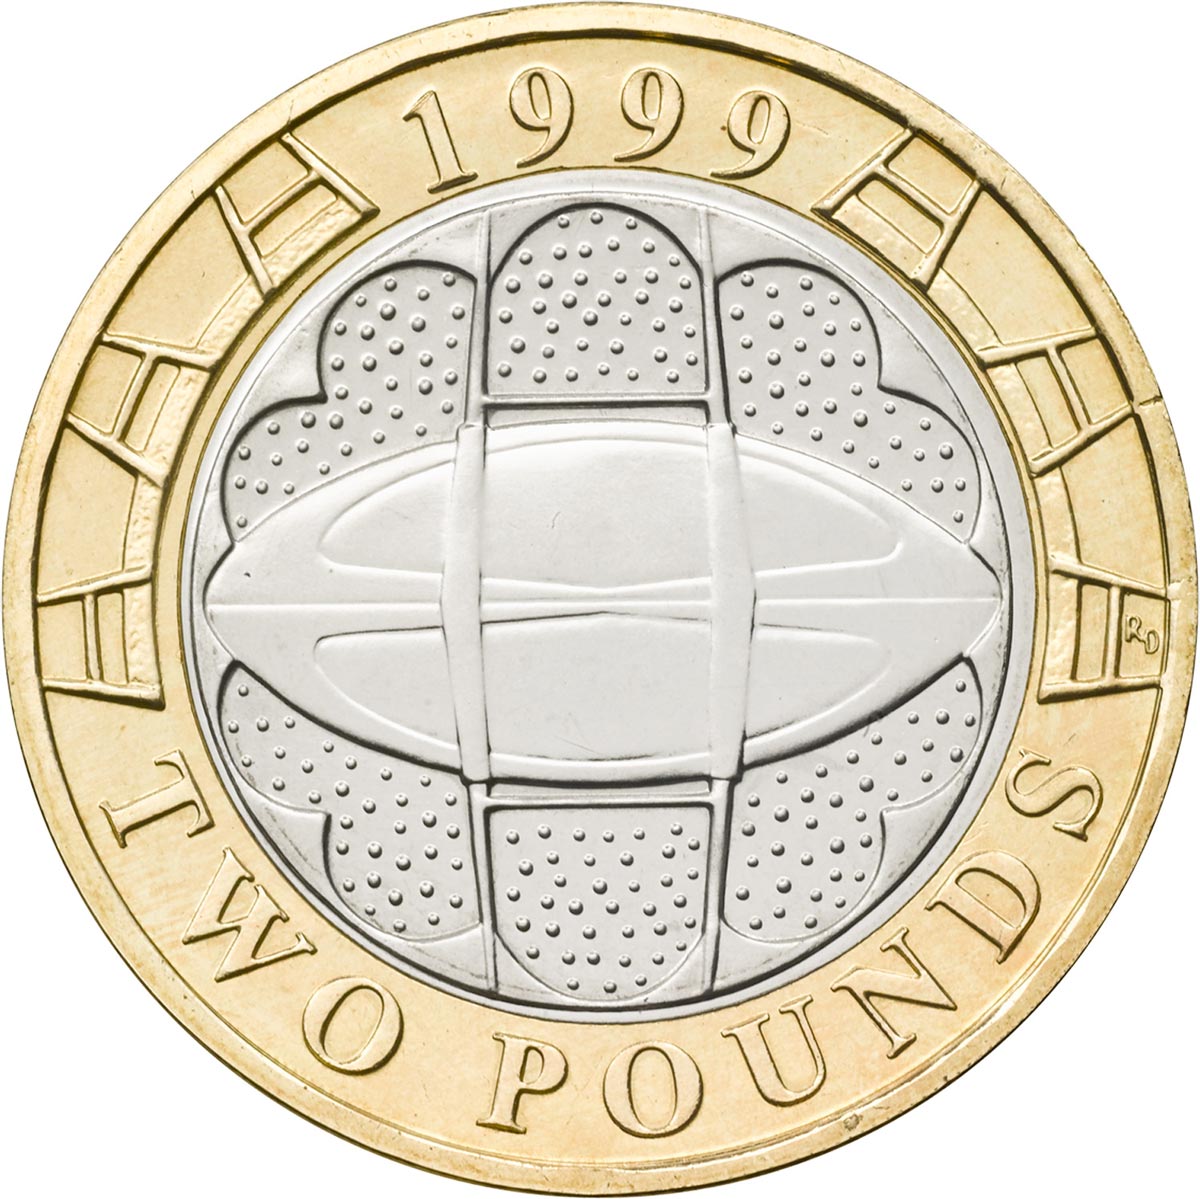 Image of 2 pounds coin - Rugby World Cup | United Kingdom 1999.  The Bimetal: CuNi, nordic gold coin is of Proof, BU, UNC quality.